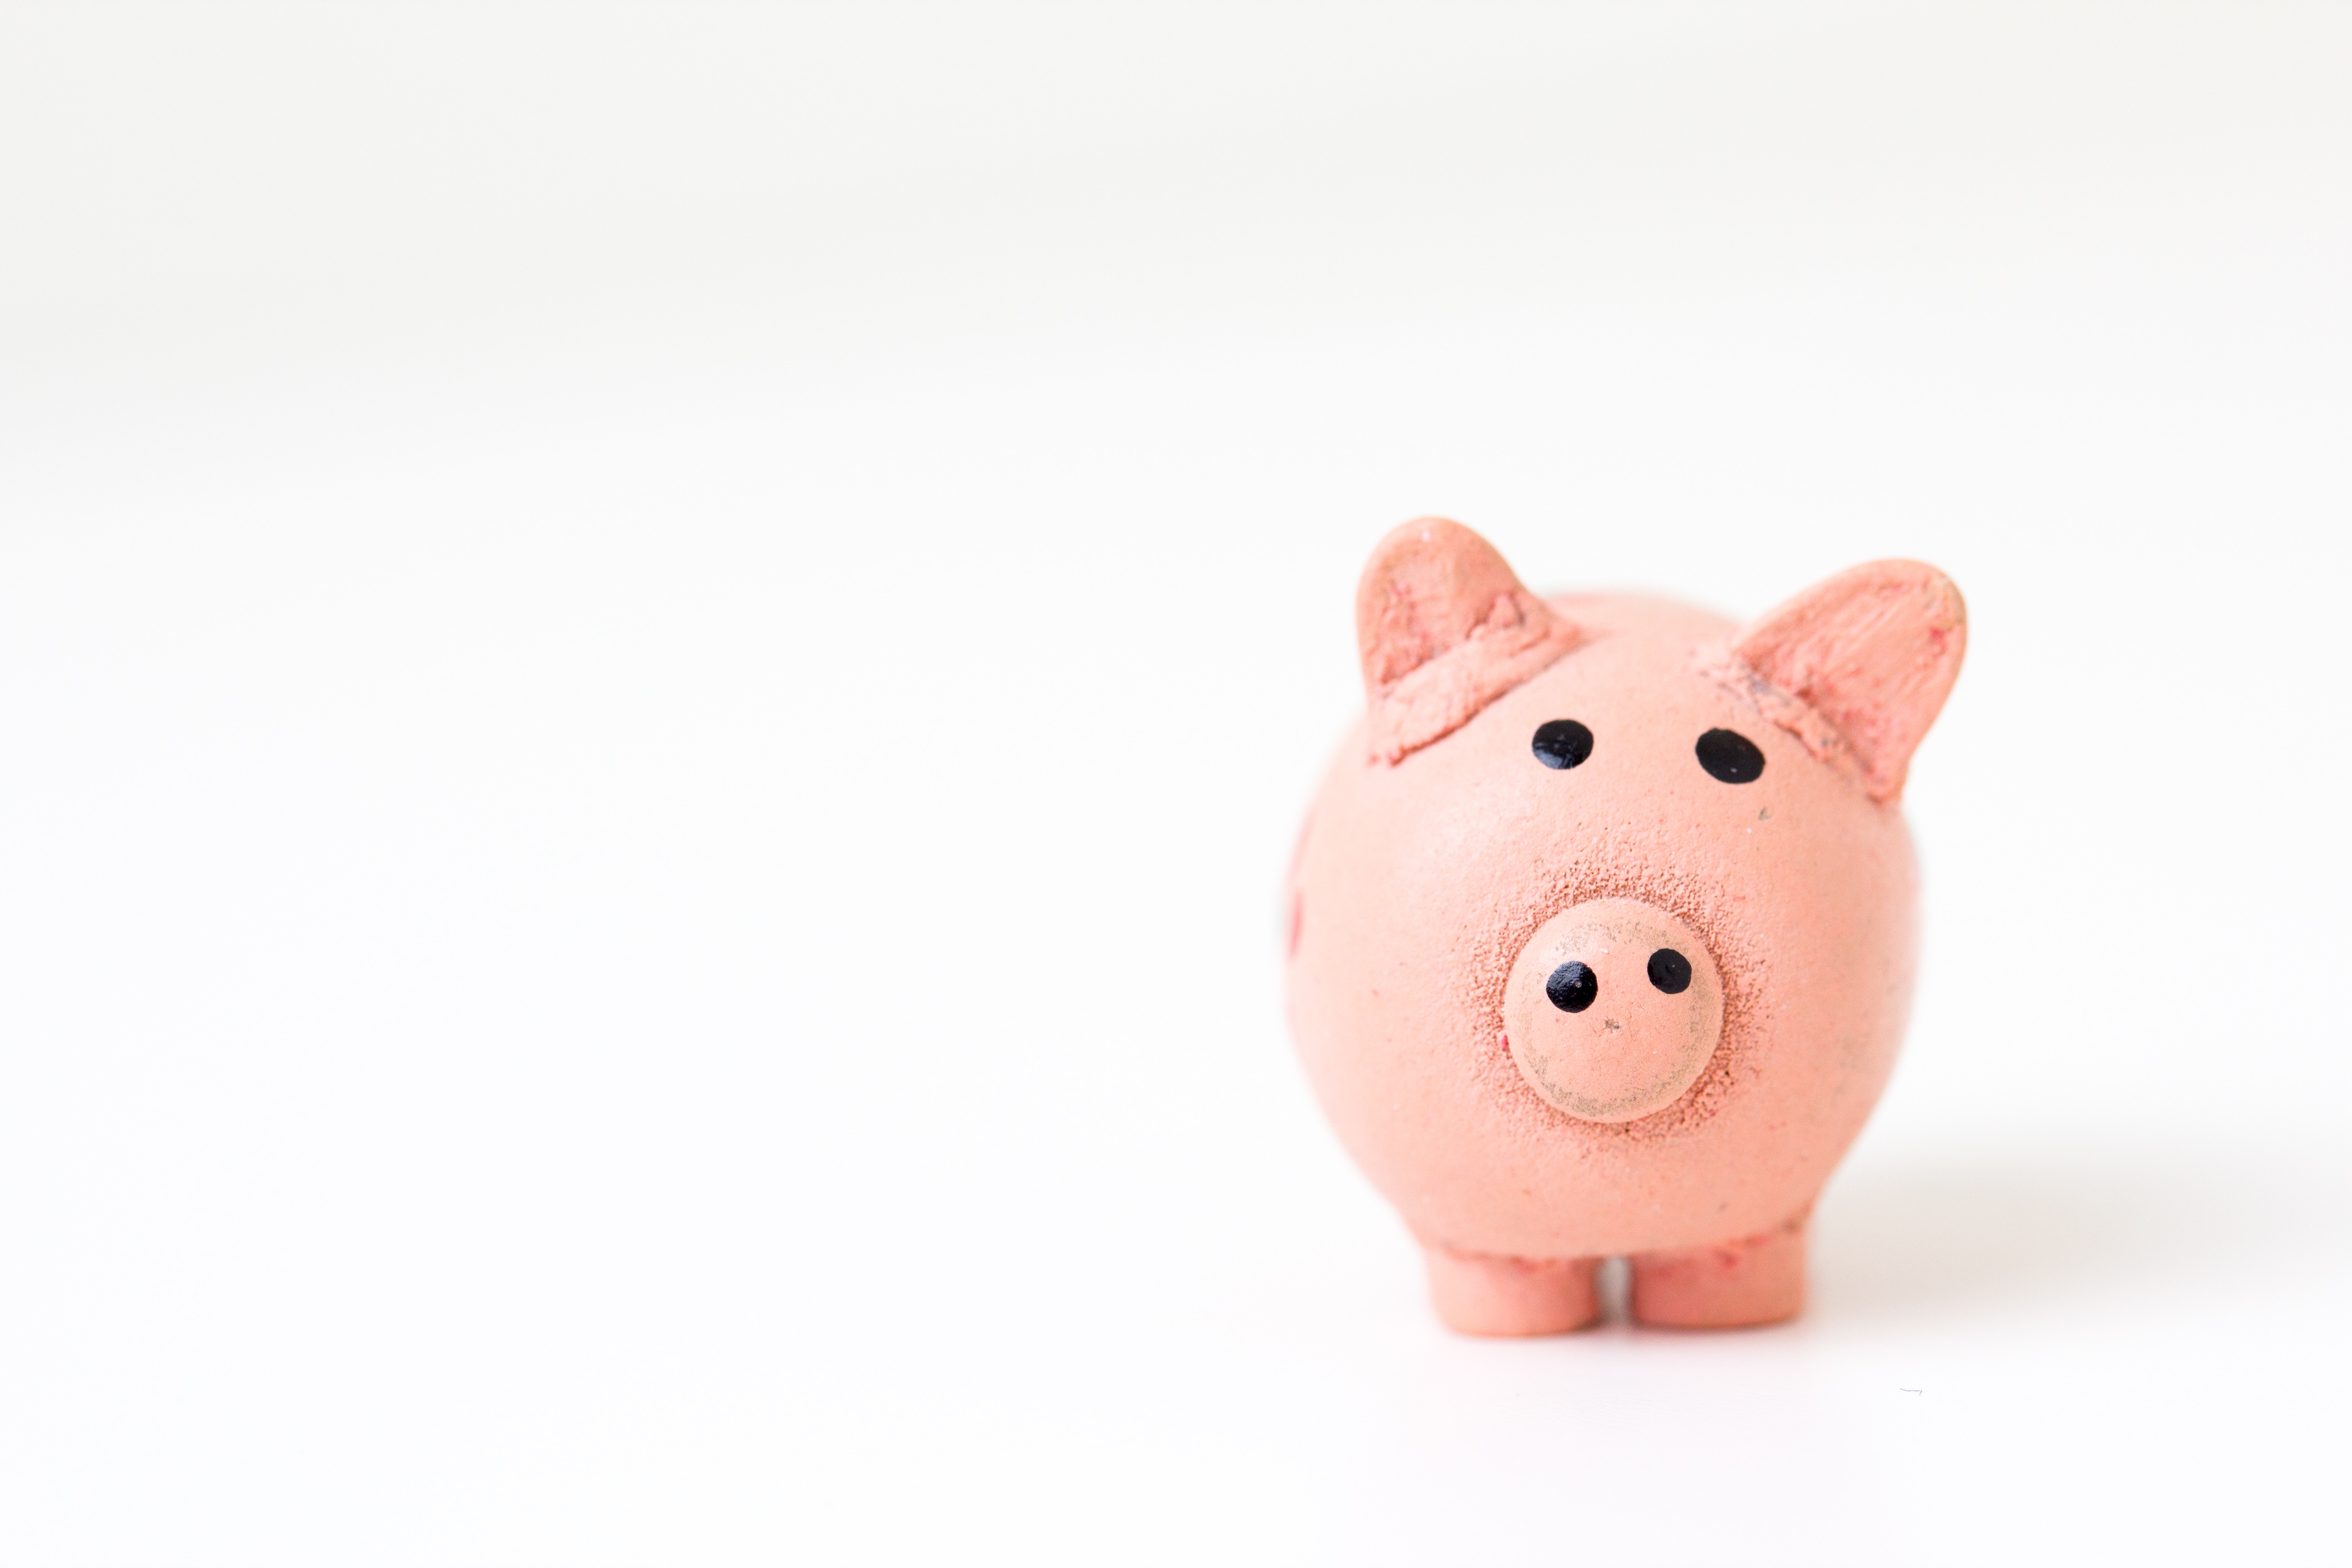 This image of is of a piggy bank and the post is about how decentralized finance offers solutions to some of the issue facing traditional finance.